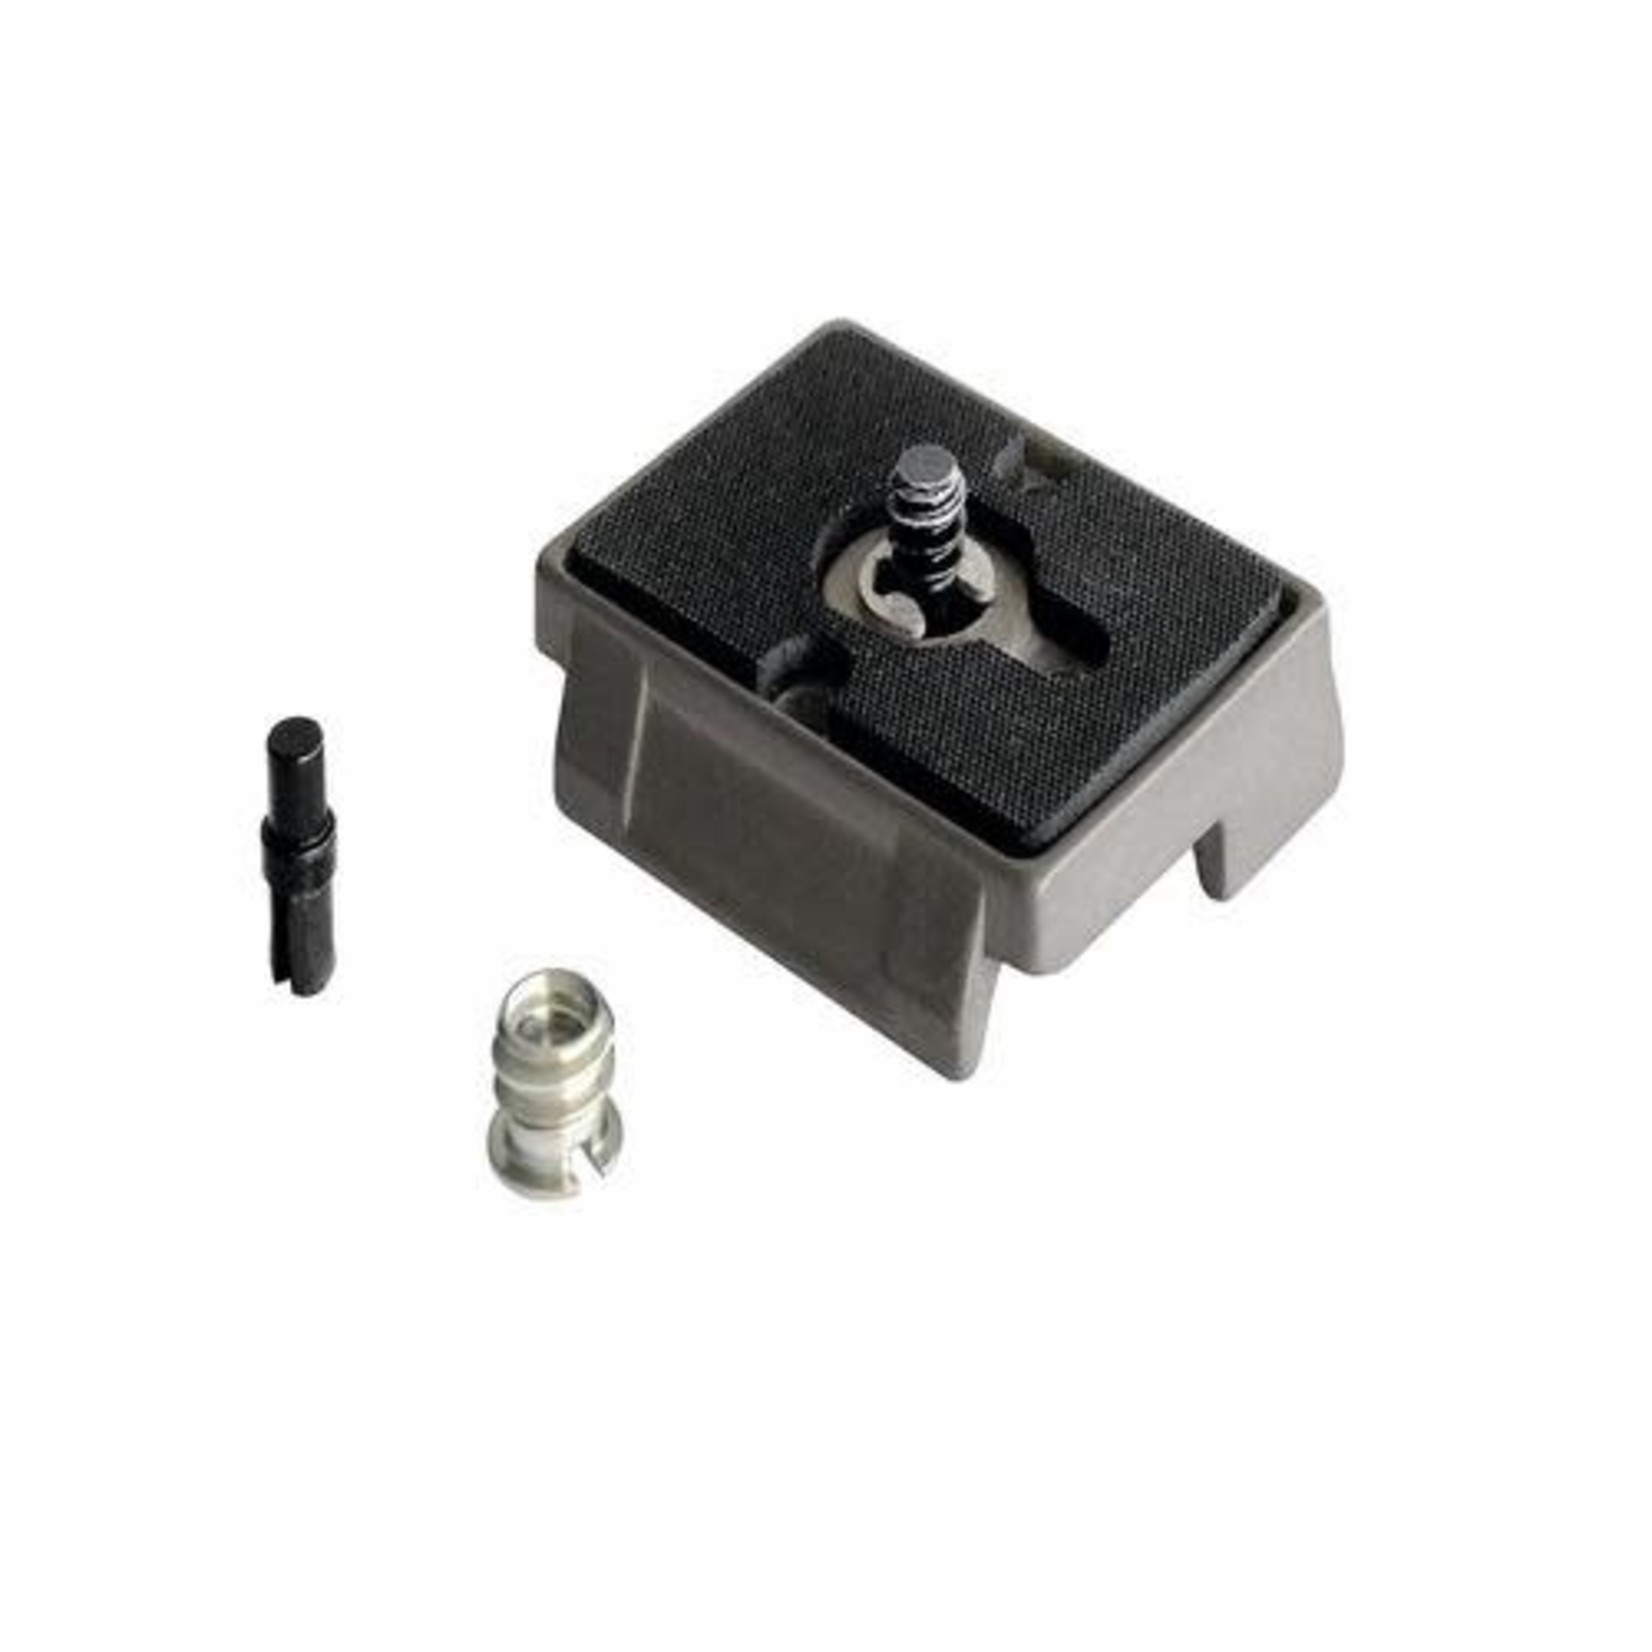 Manfrotto Manfrotto 200PL | Quick Release Plate with 1/4" Screw and Rubber Grip